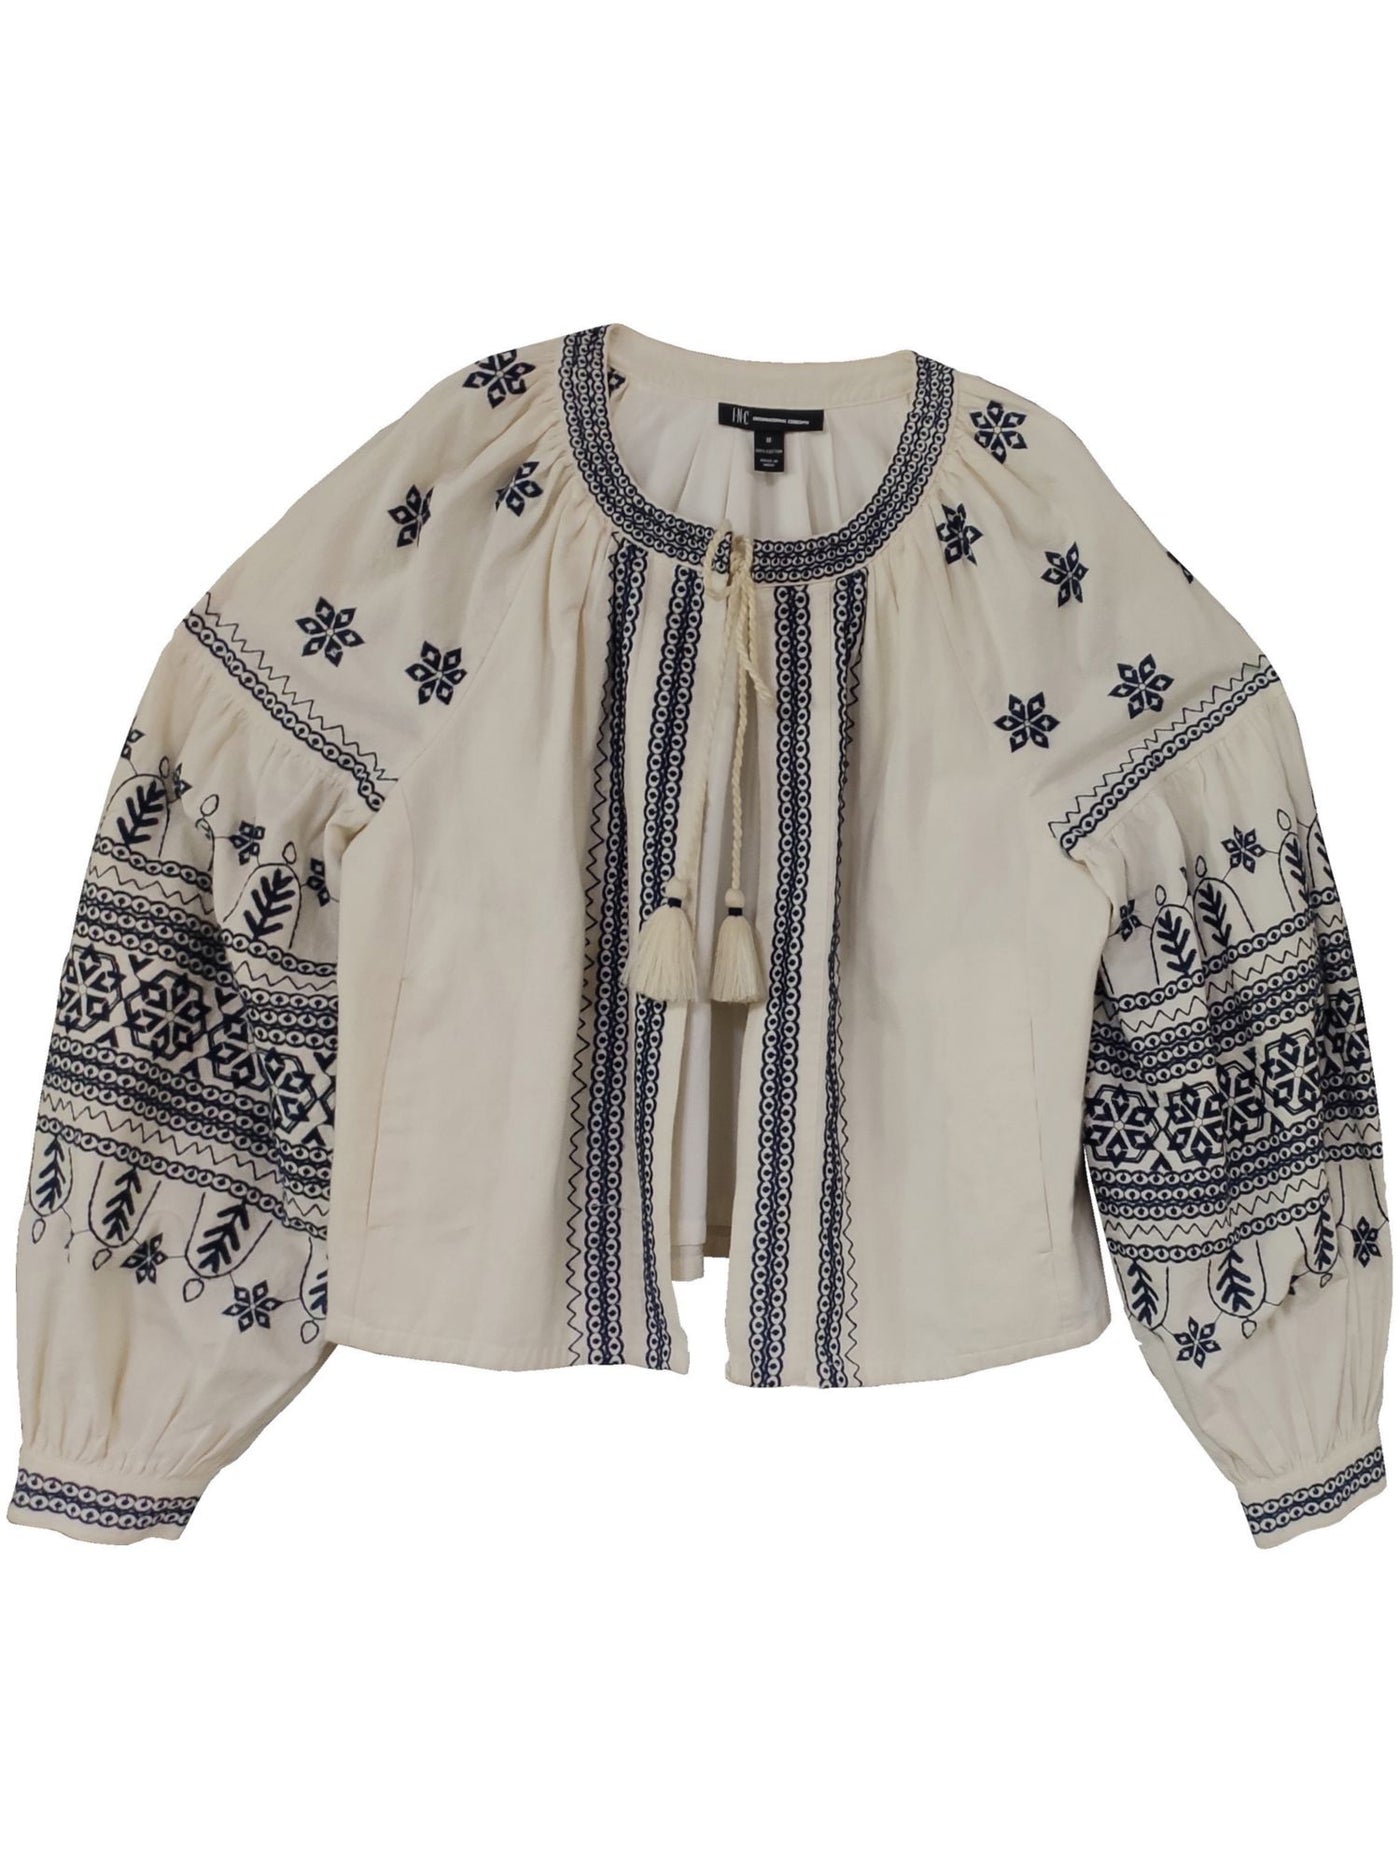 INC Womens Ivory Patterned Open Cardigan Top L